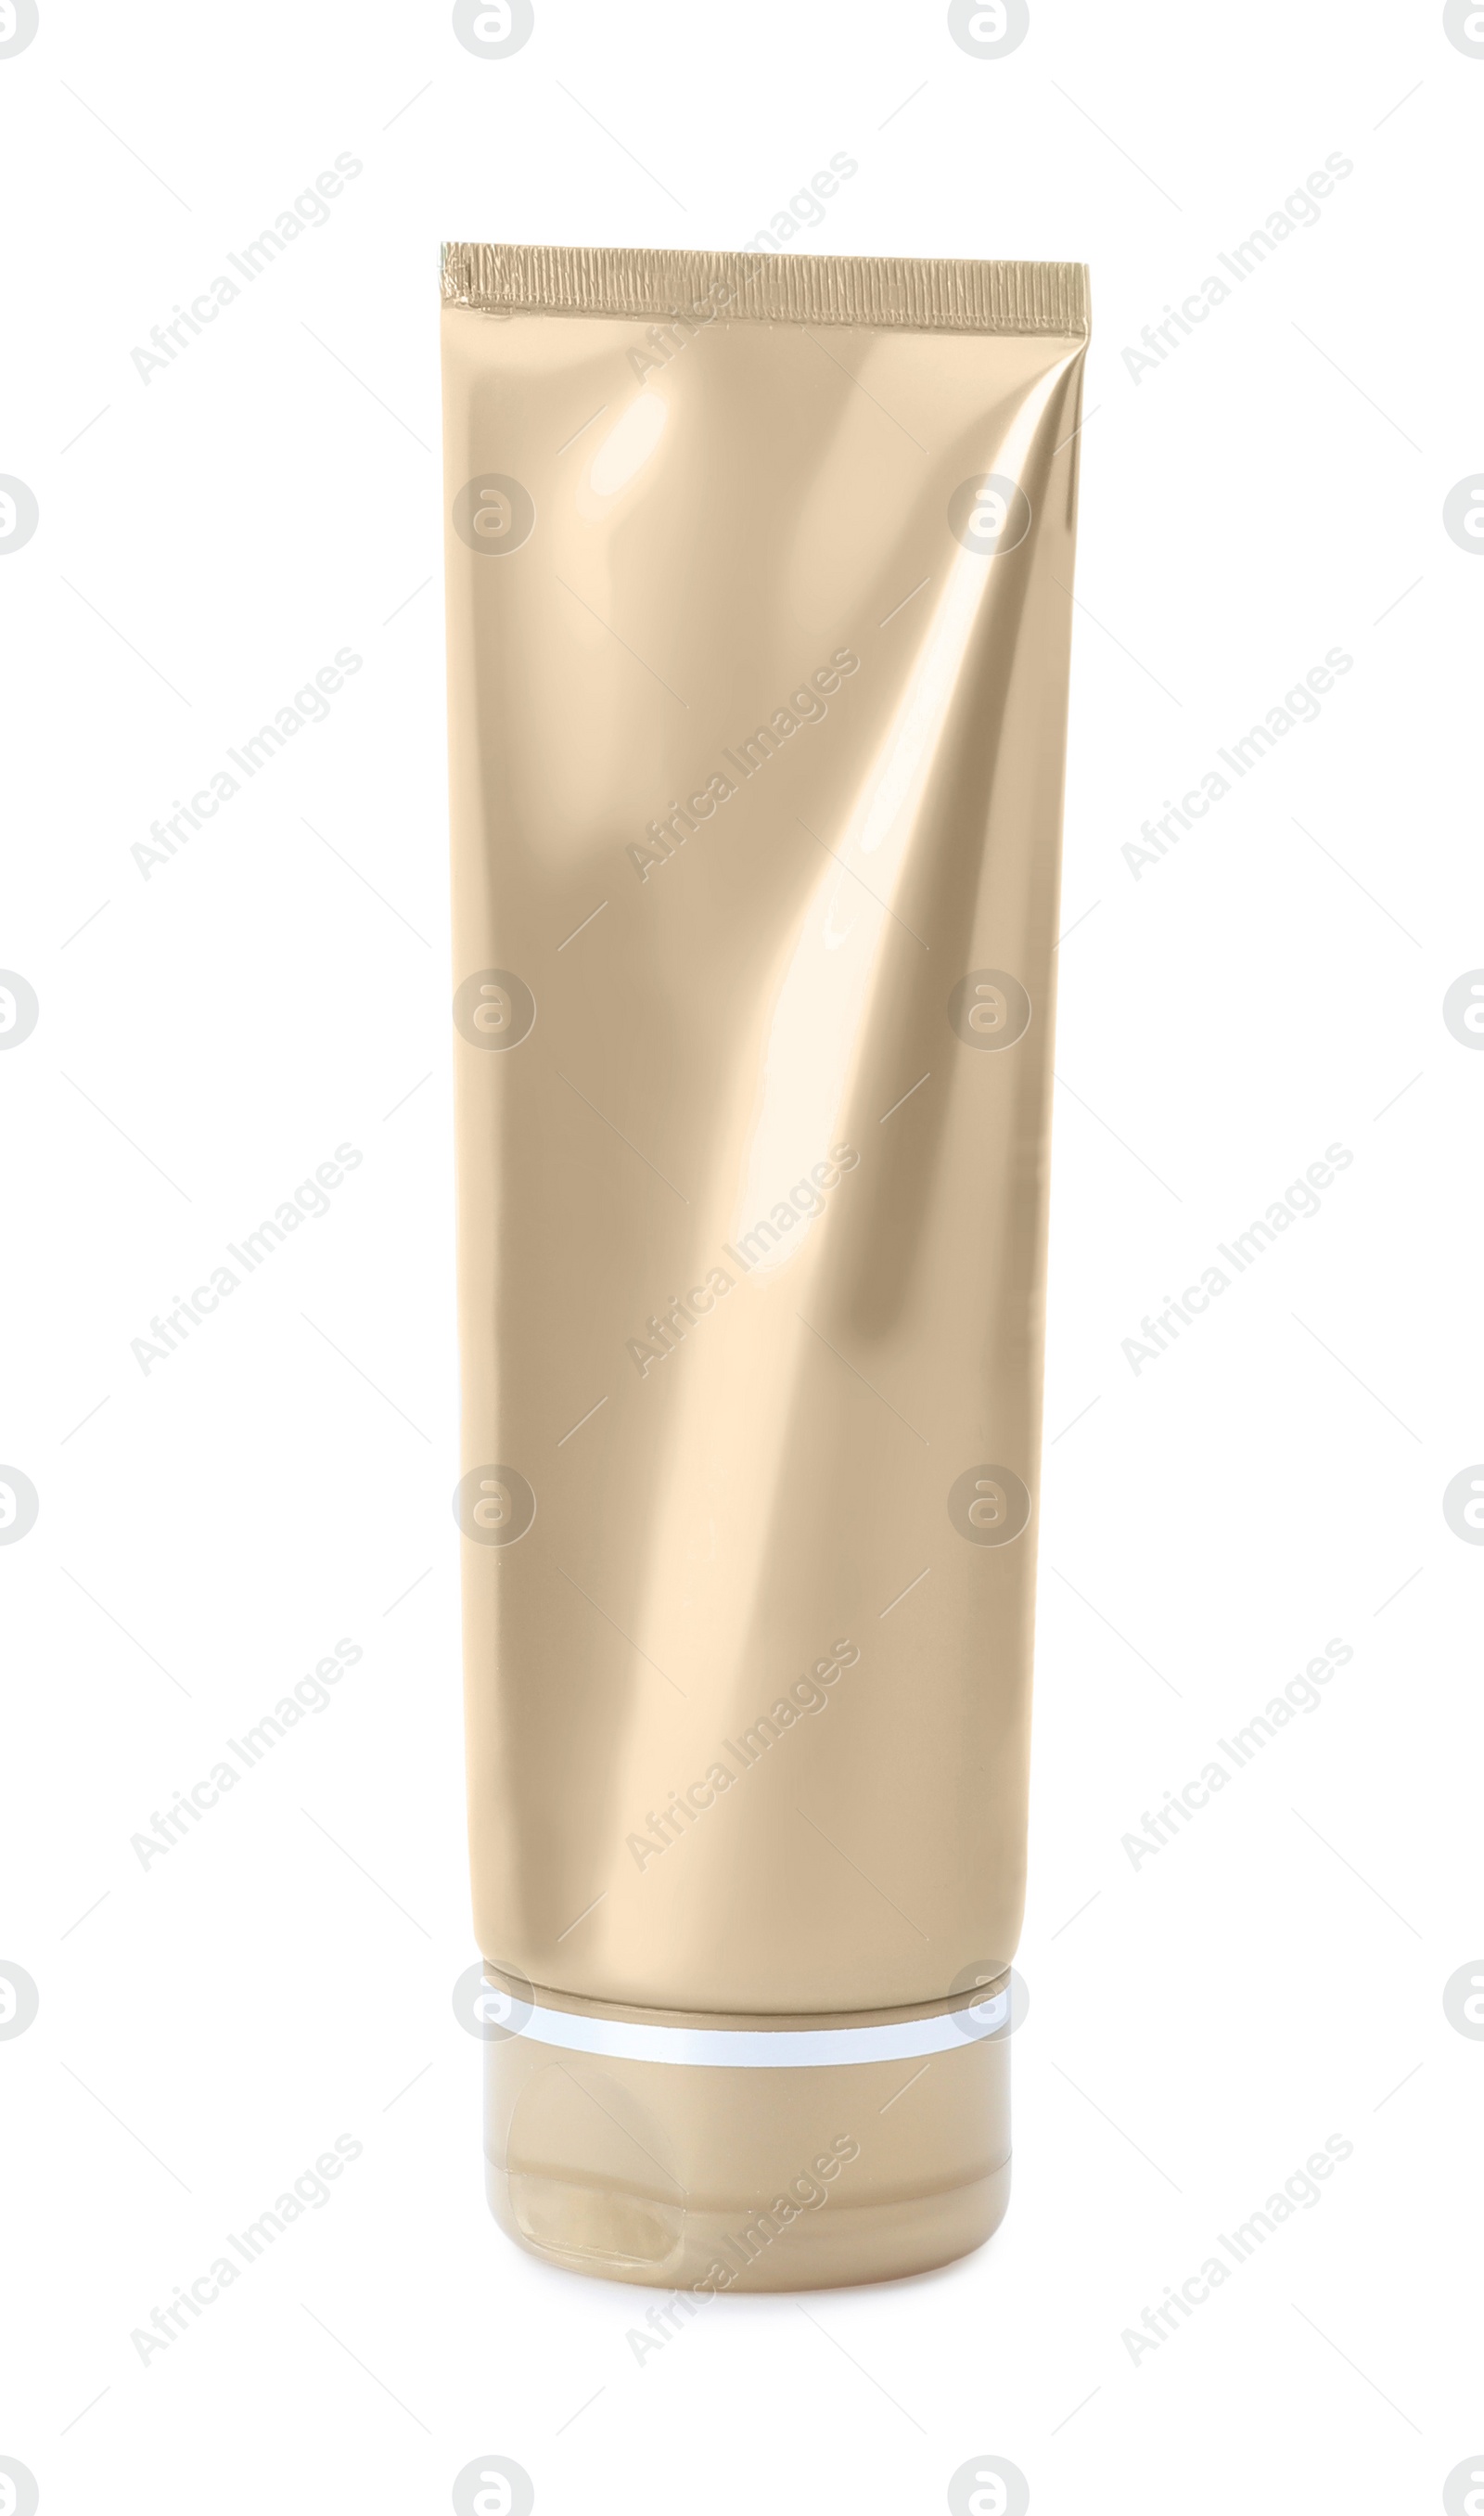 Photo of Tube of cosmetic product isolated on white